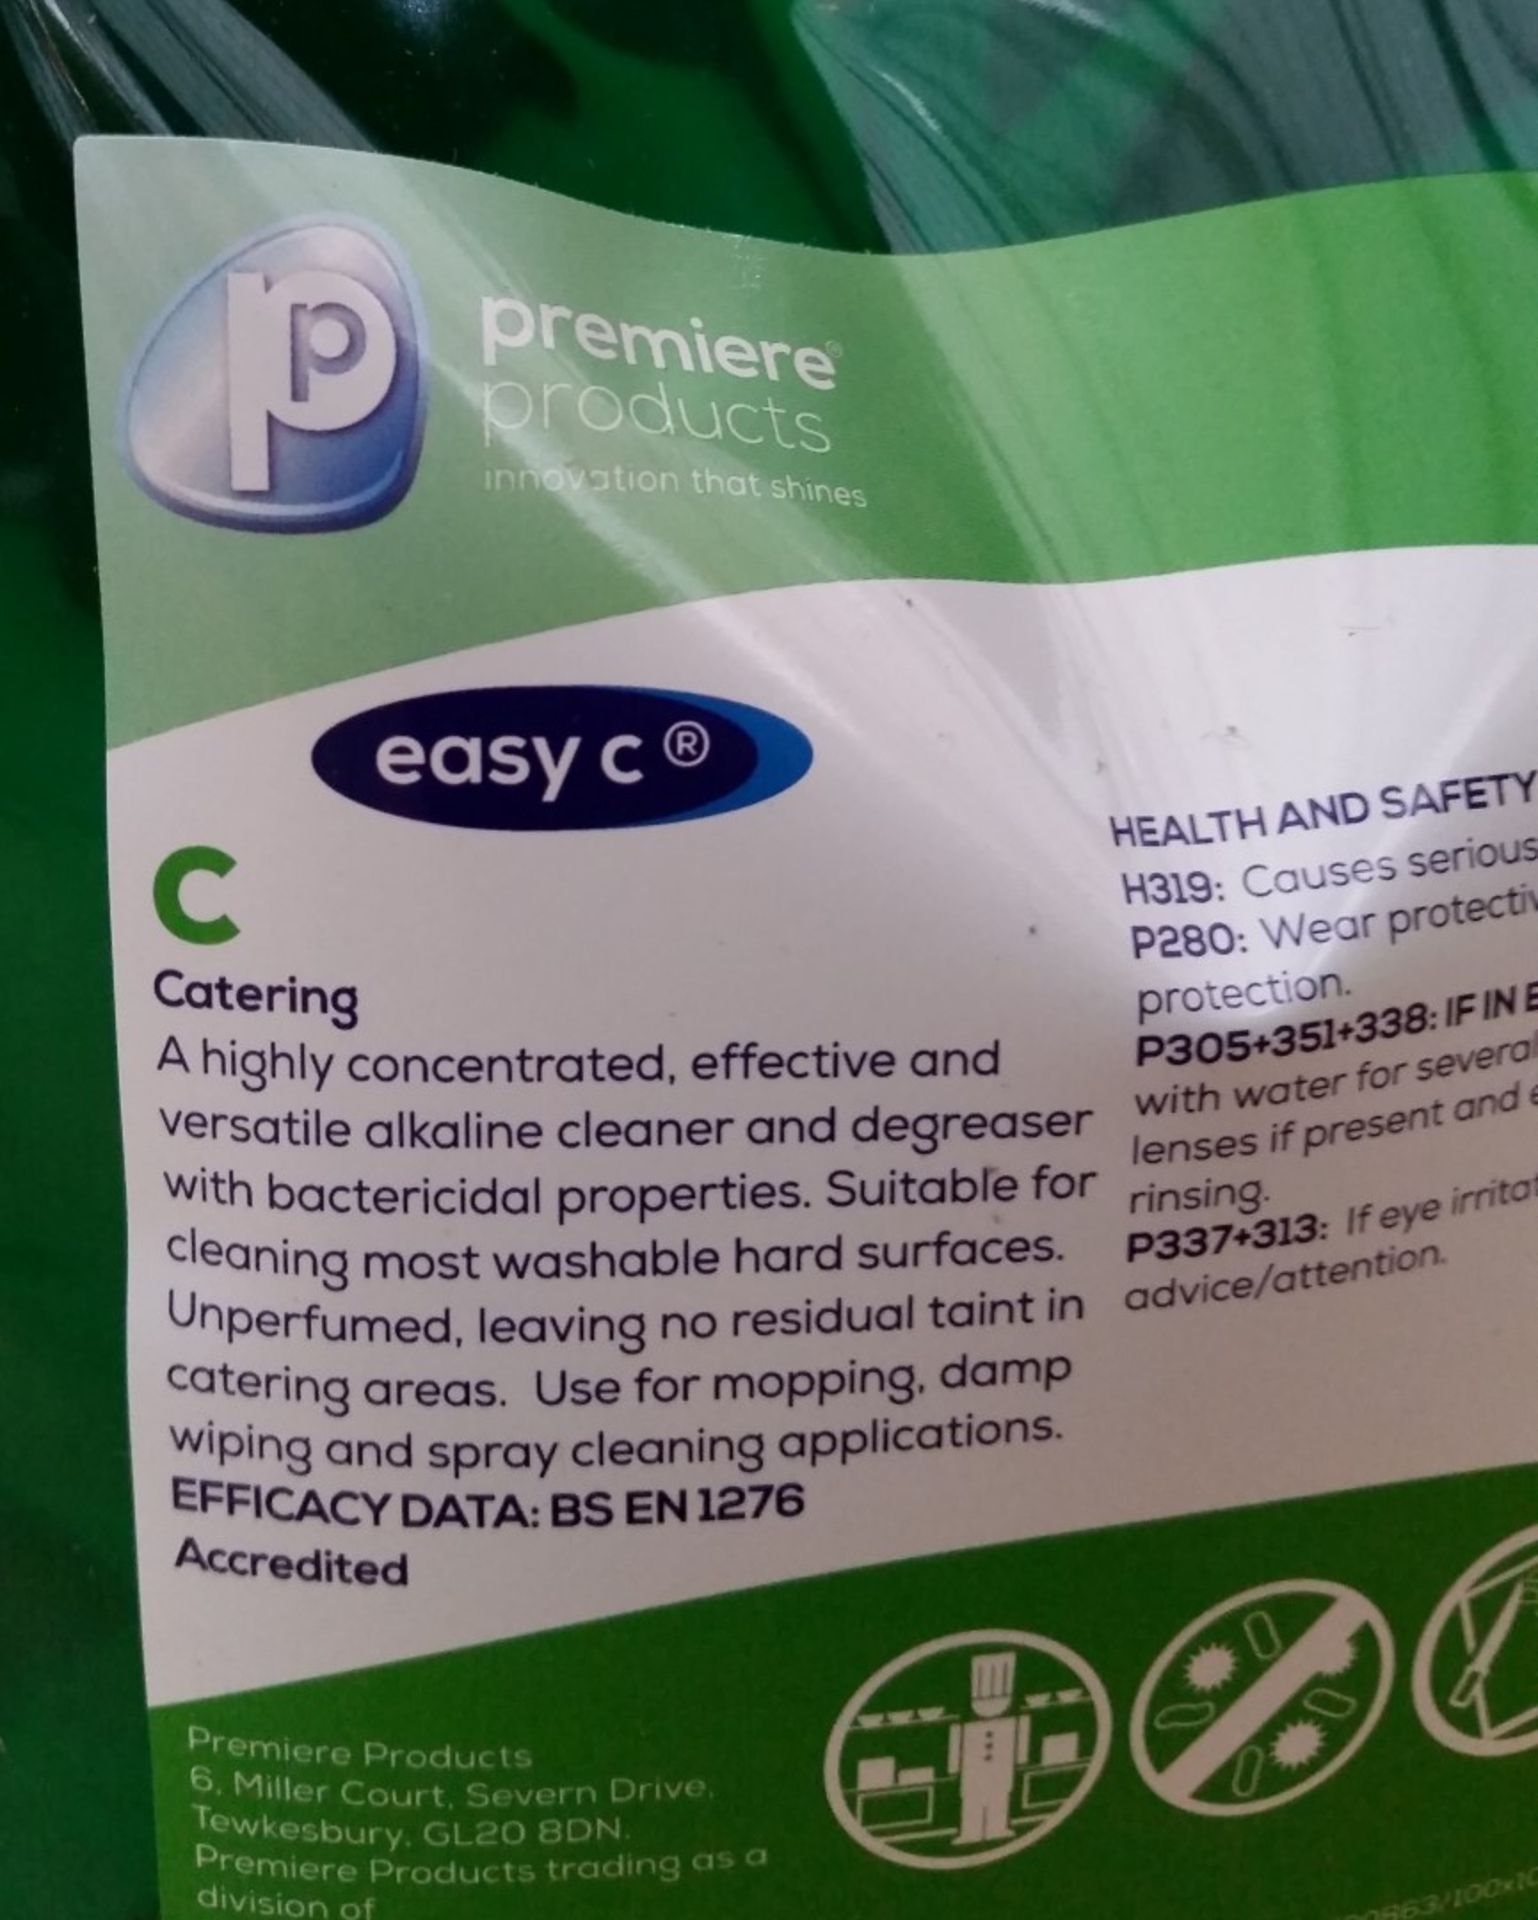 4 x Premiere 1.7 Litre Easy C (Catering) Alkaline Cleaner and Degreaser With Bacterial - Image 4 of 5